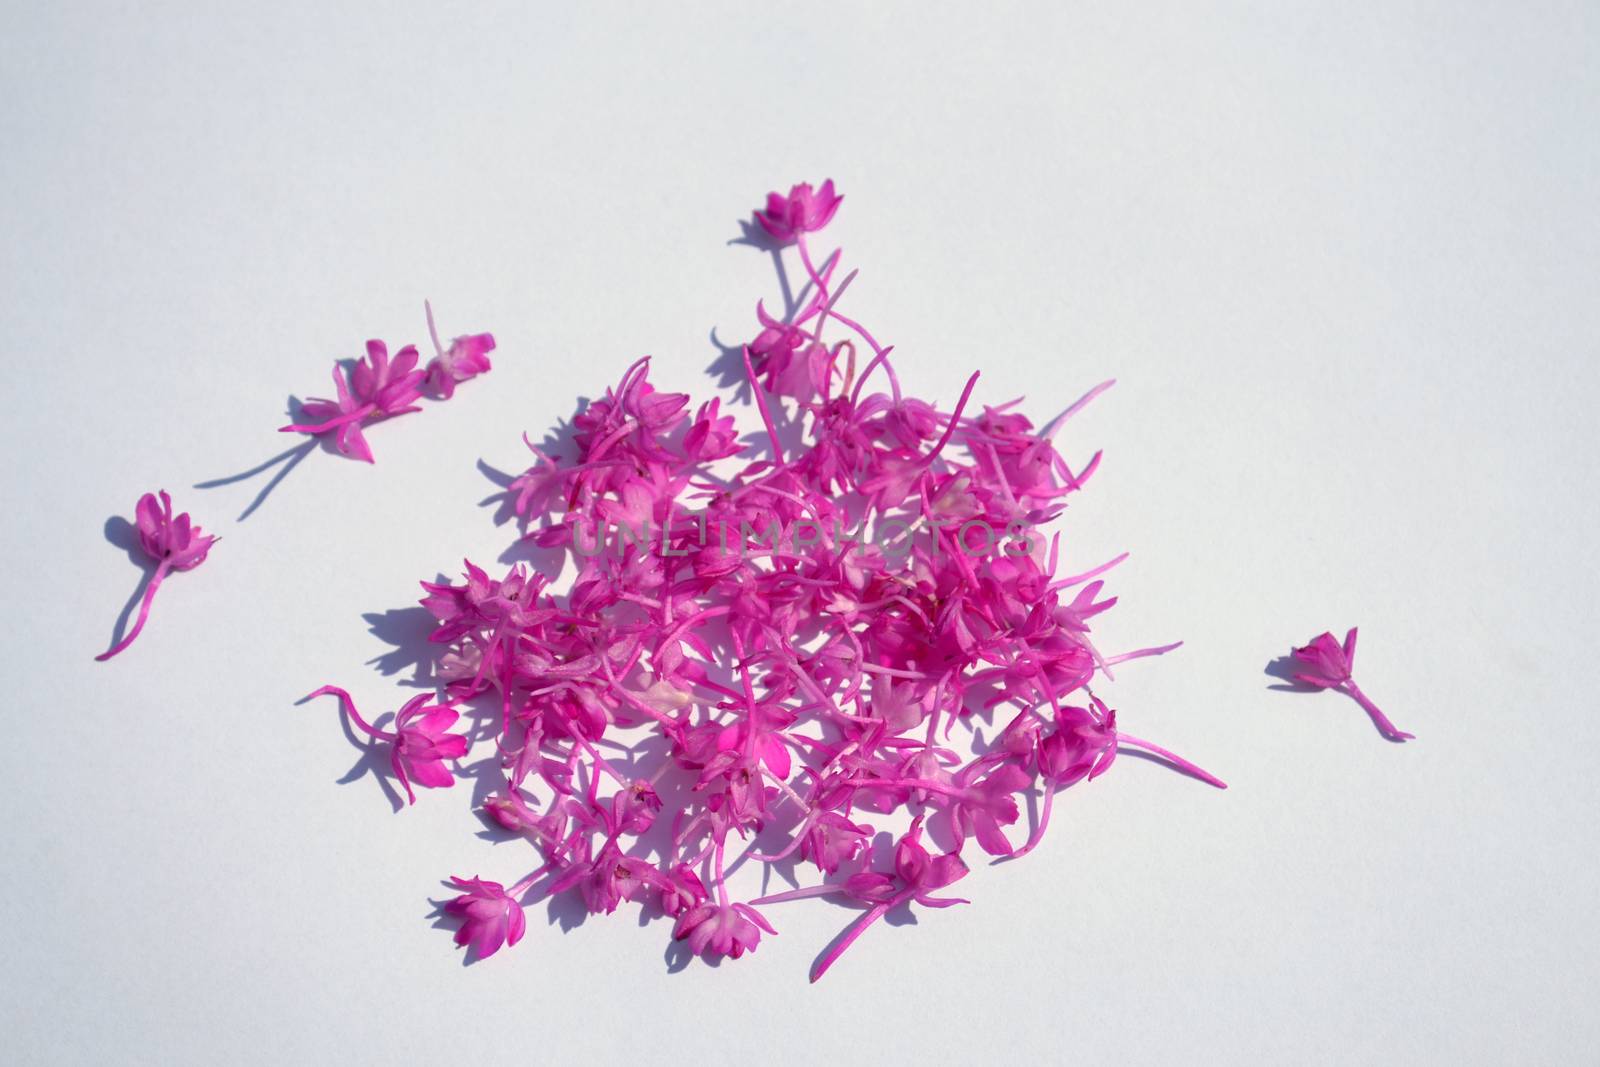 Bunch of pink flowers on white background